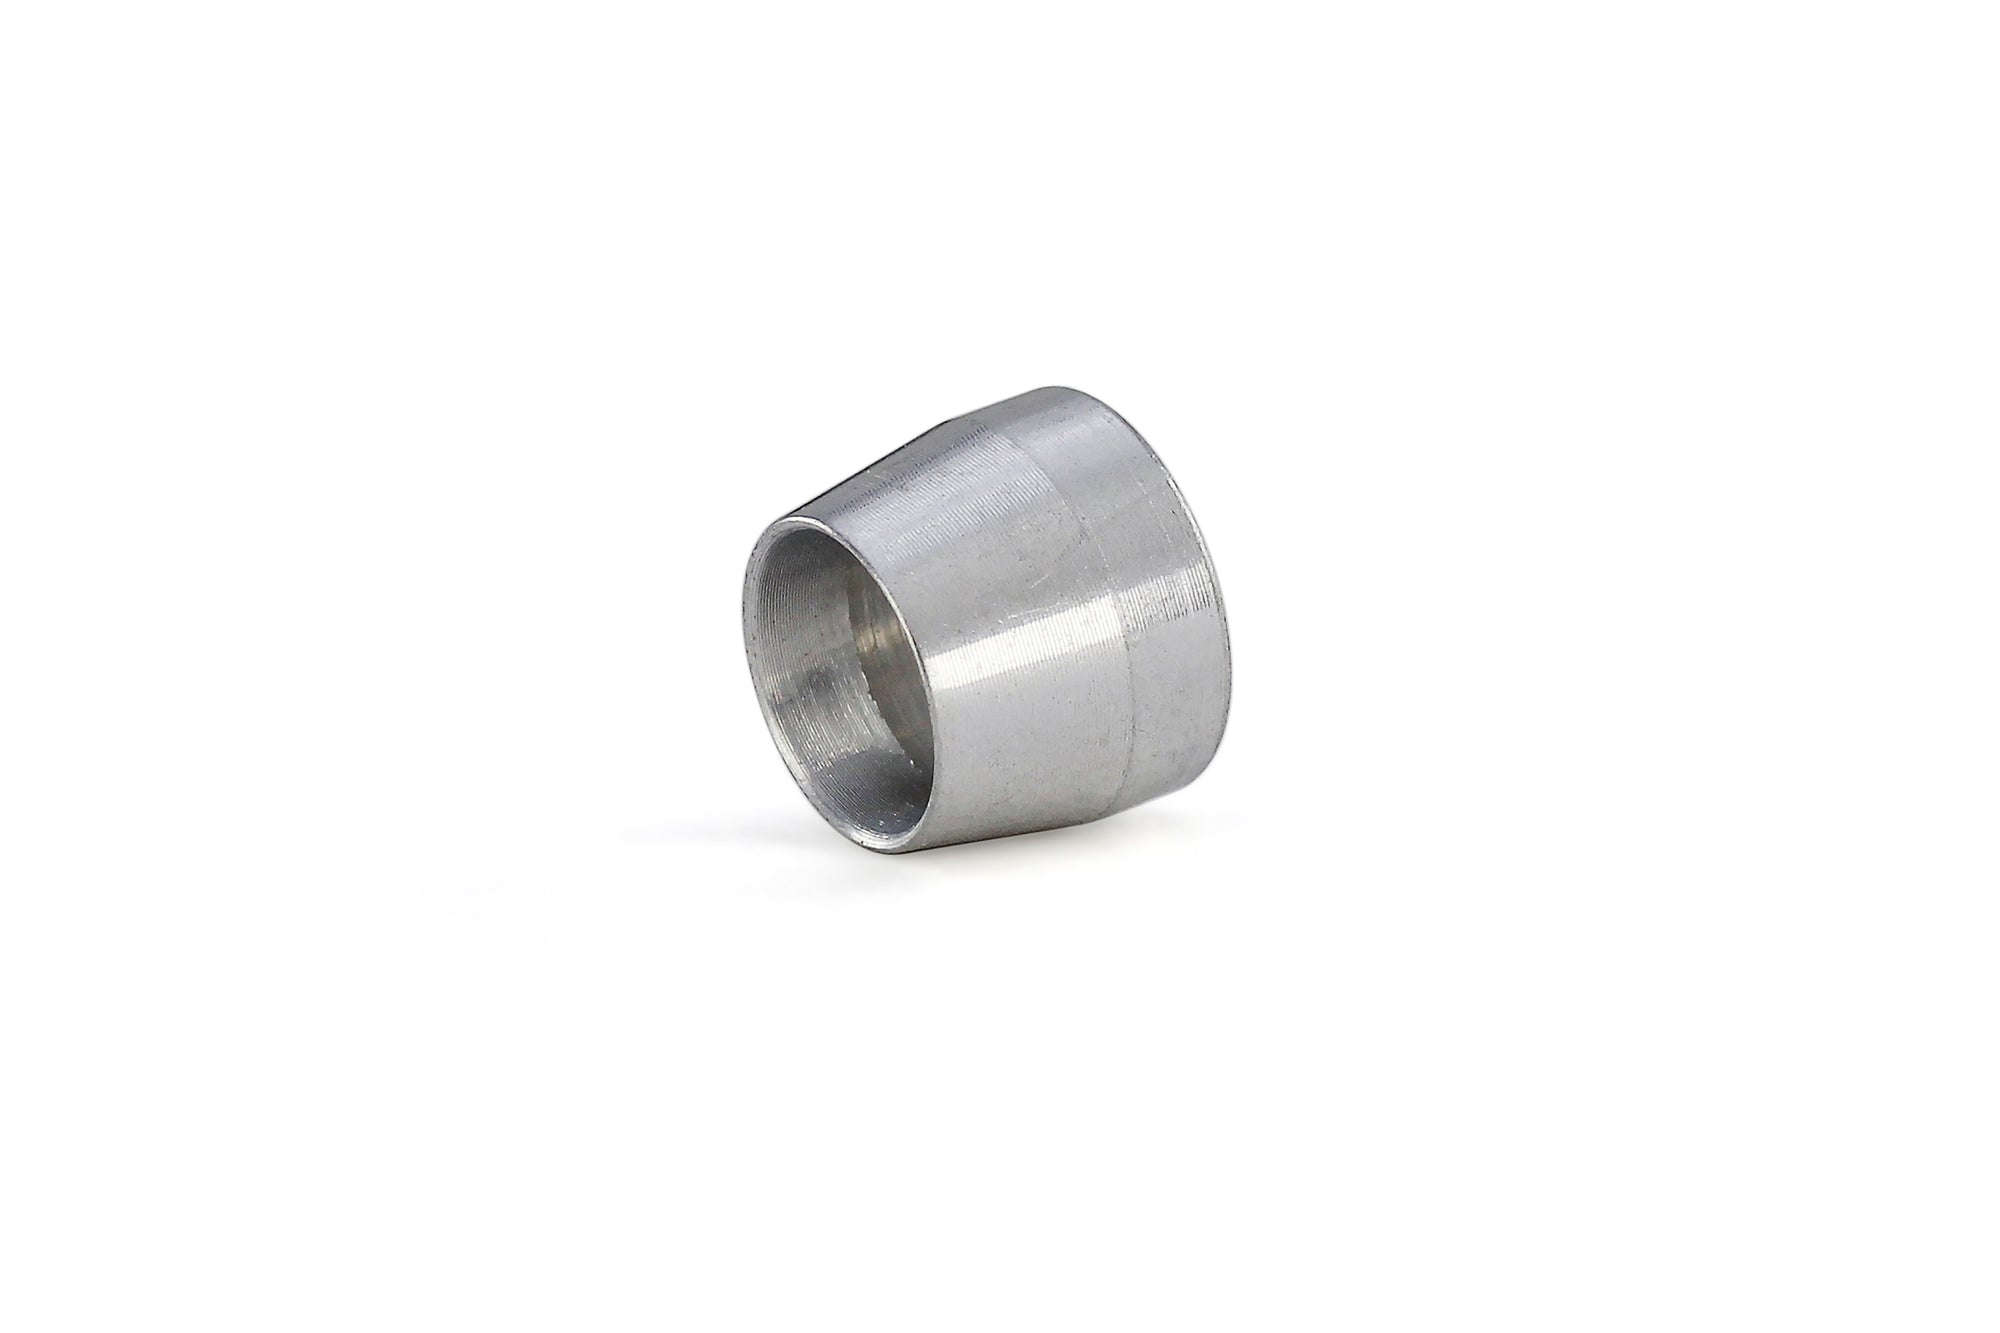 Aluminum Olive Insert Replacement for HPS 350 Series PTFE Teflon Fuel Line Hose End Fittings